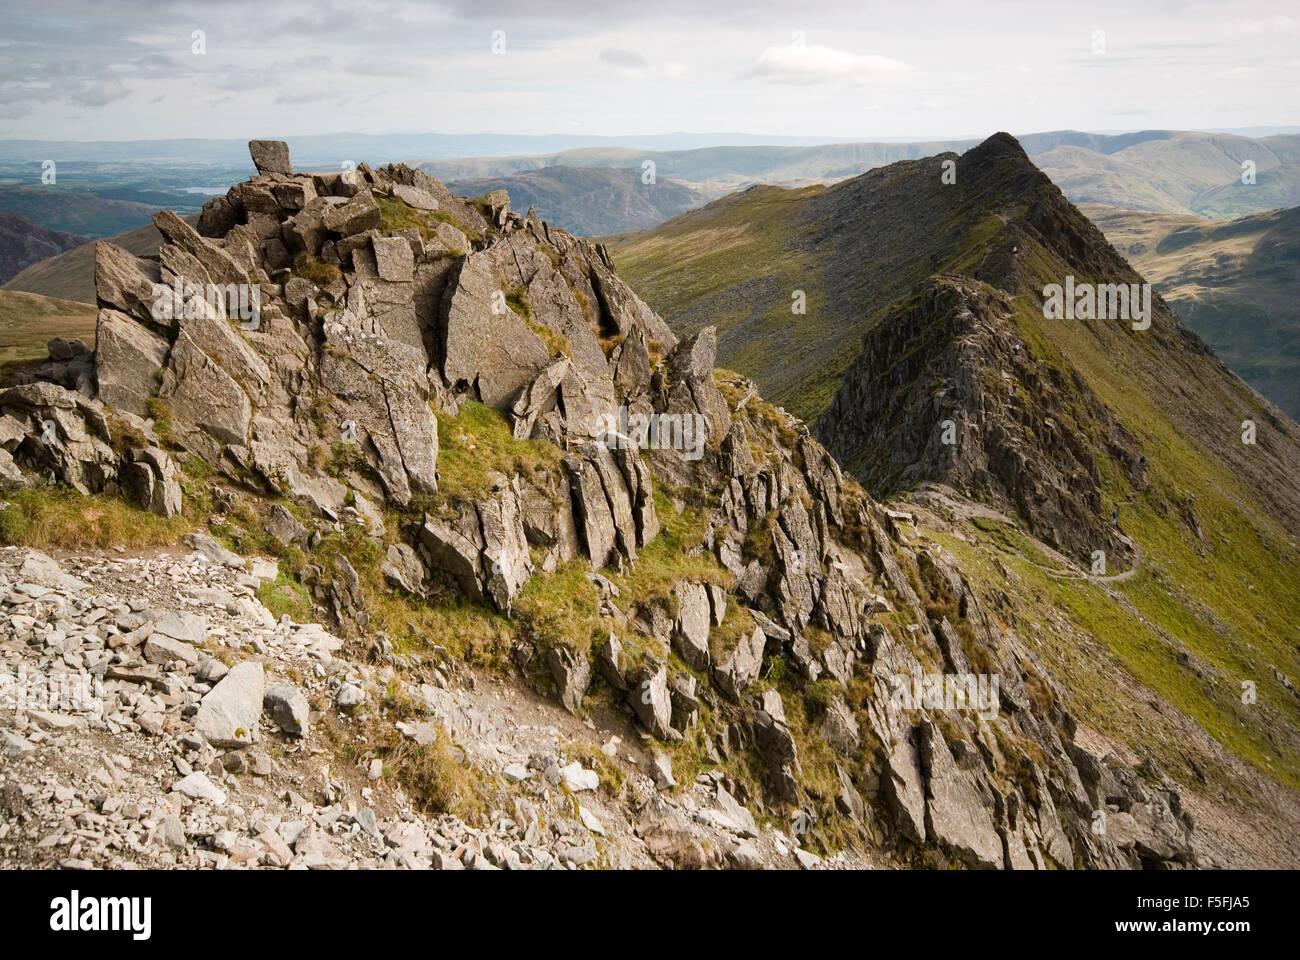 View of the knife edge ridge of Striding Edge in The Lake District National Park, Cumbria, England UK. Stock Photo